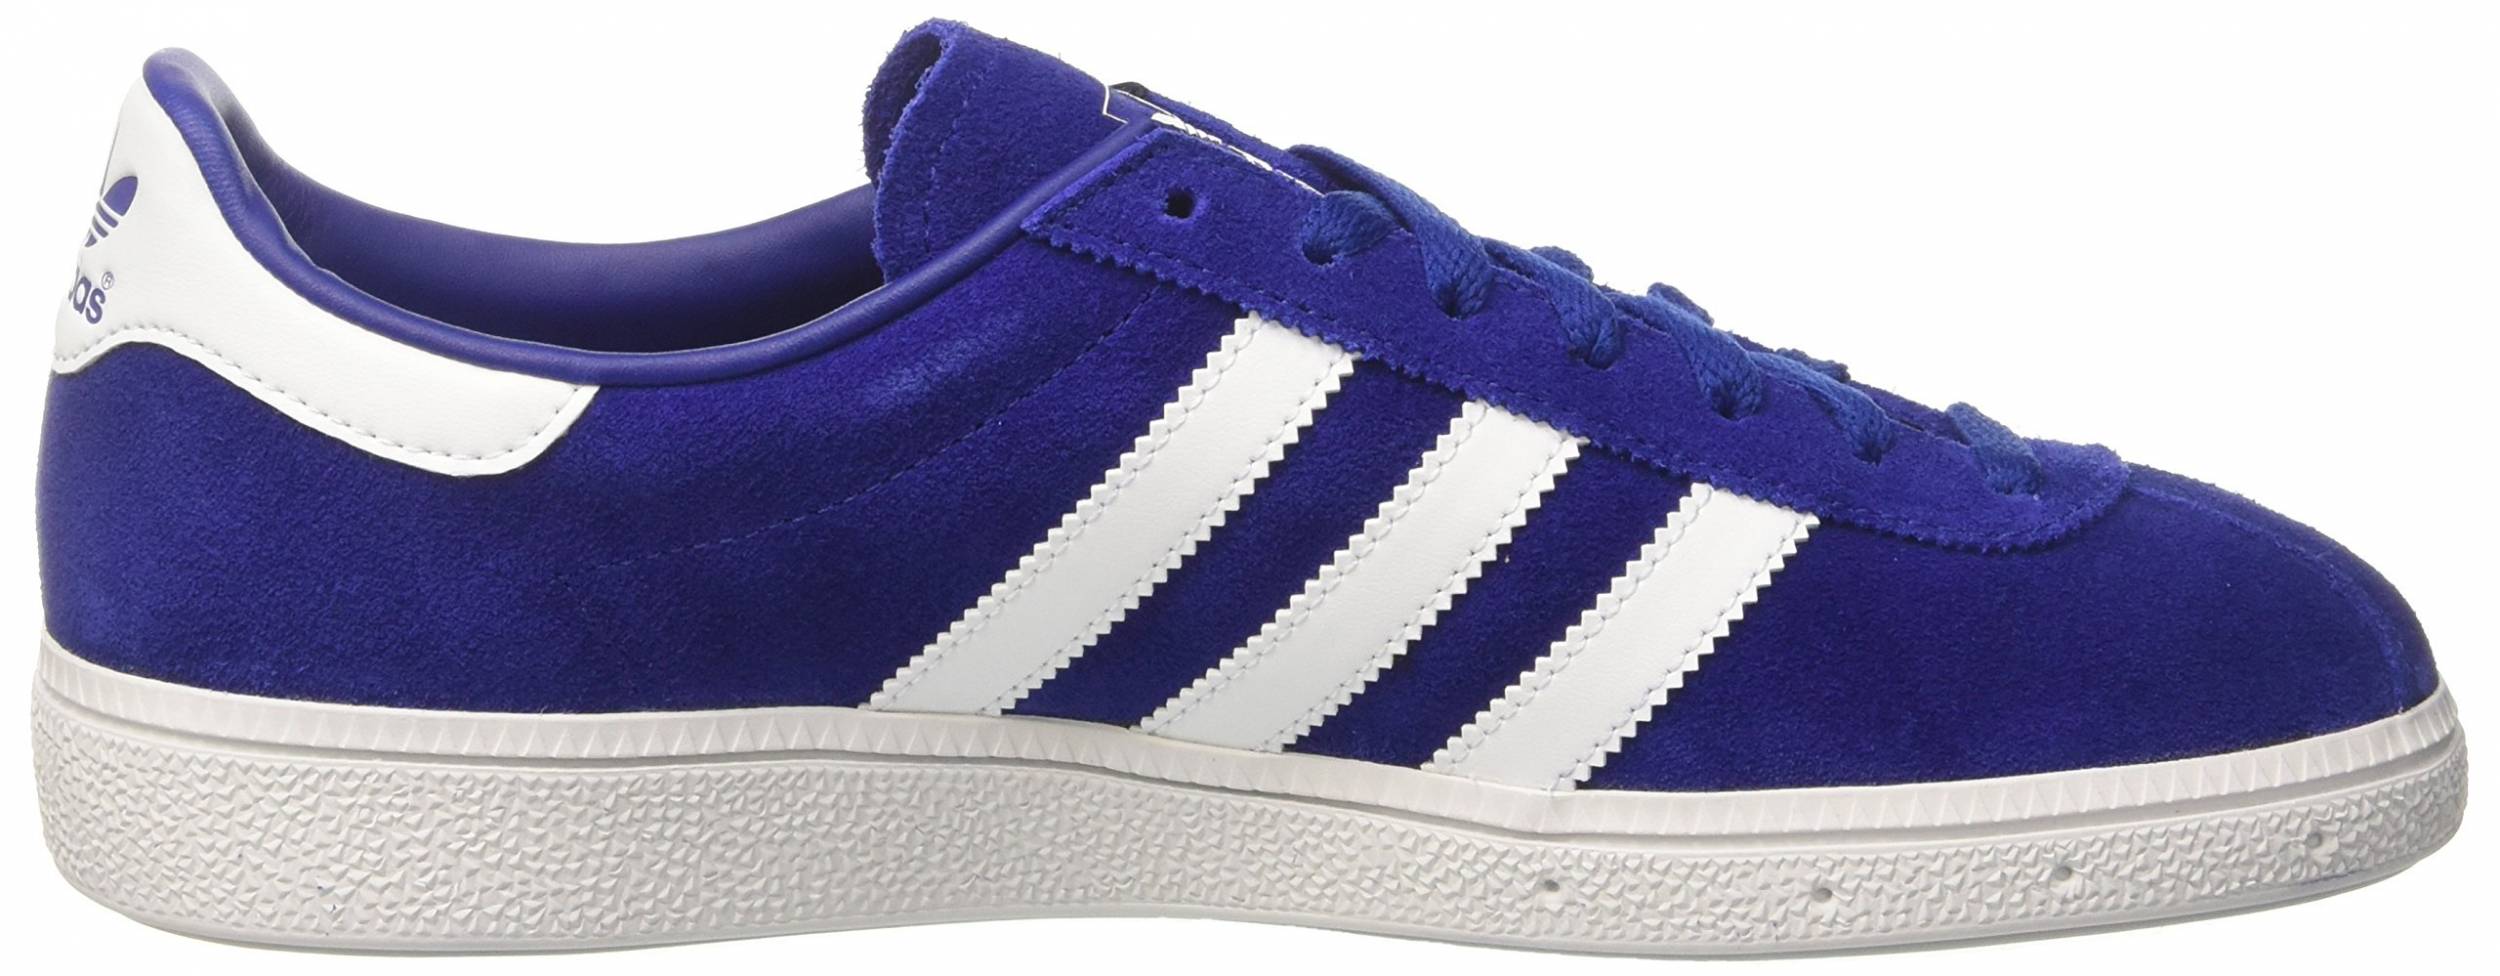 Adidas Munchen Sneakers In 6 Colors Only 70 Runrepeat